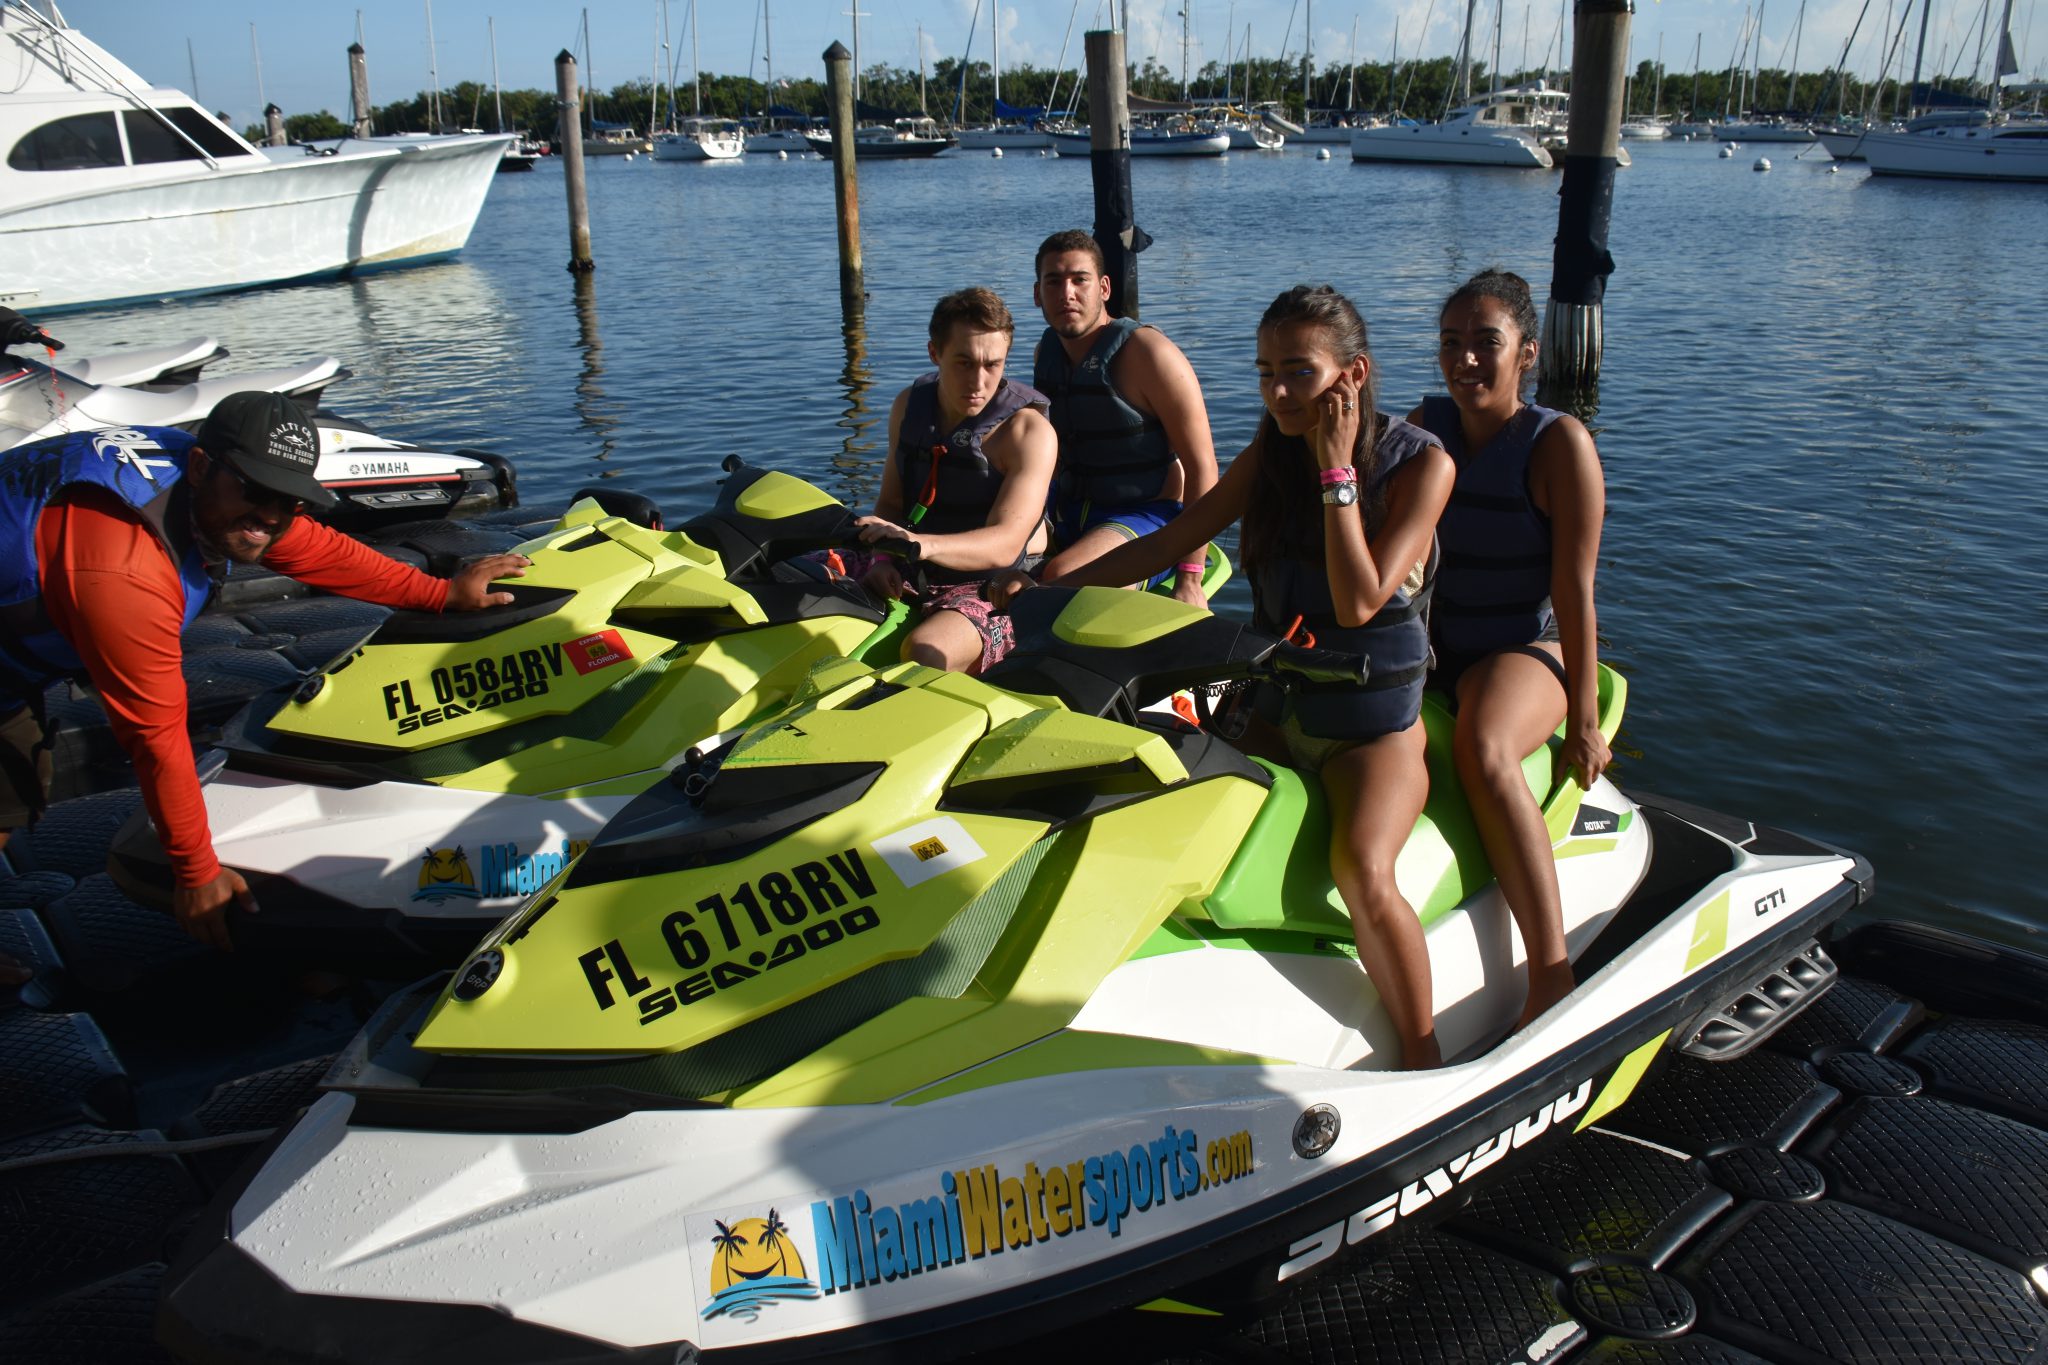 Maximizing your Fun, Tips for Jet Skiing with Friends in Miami